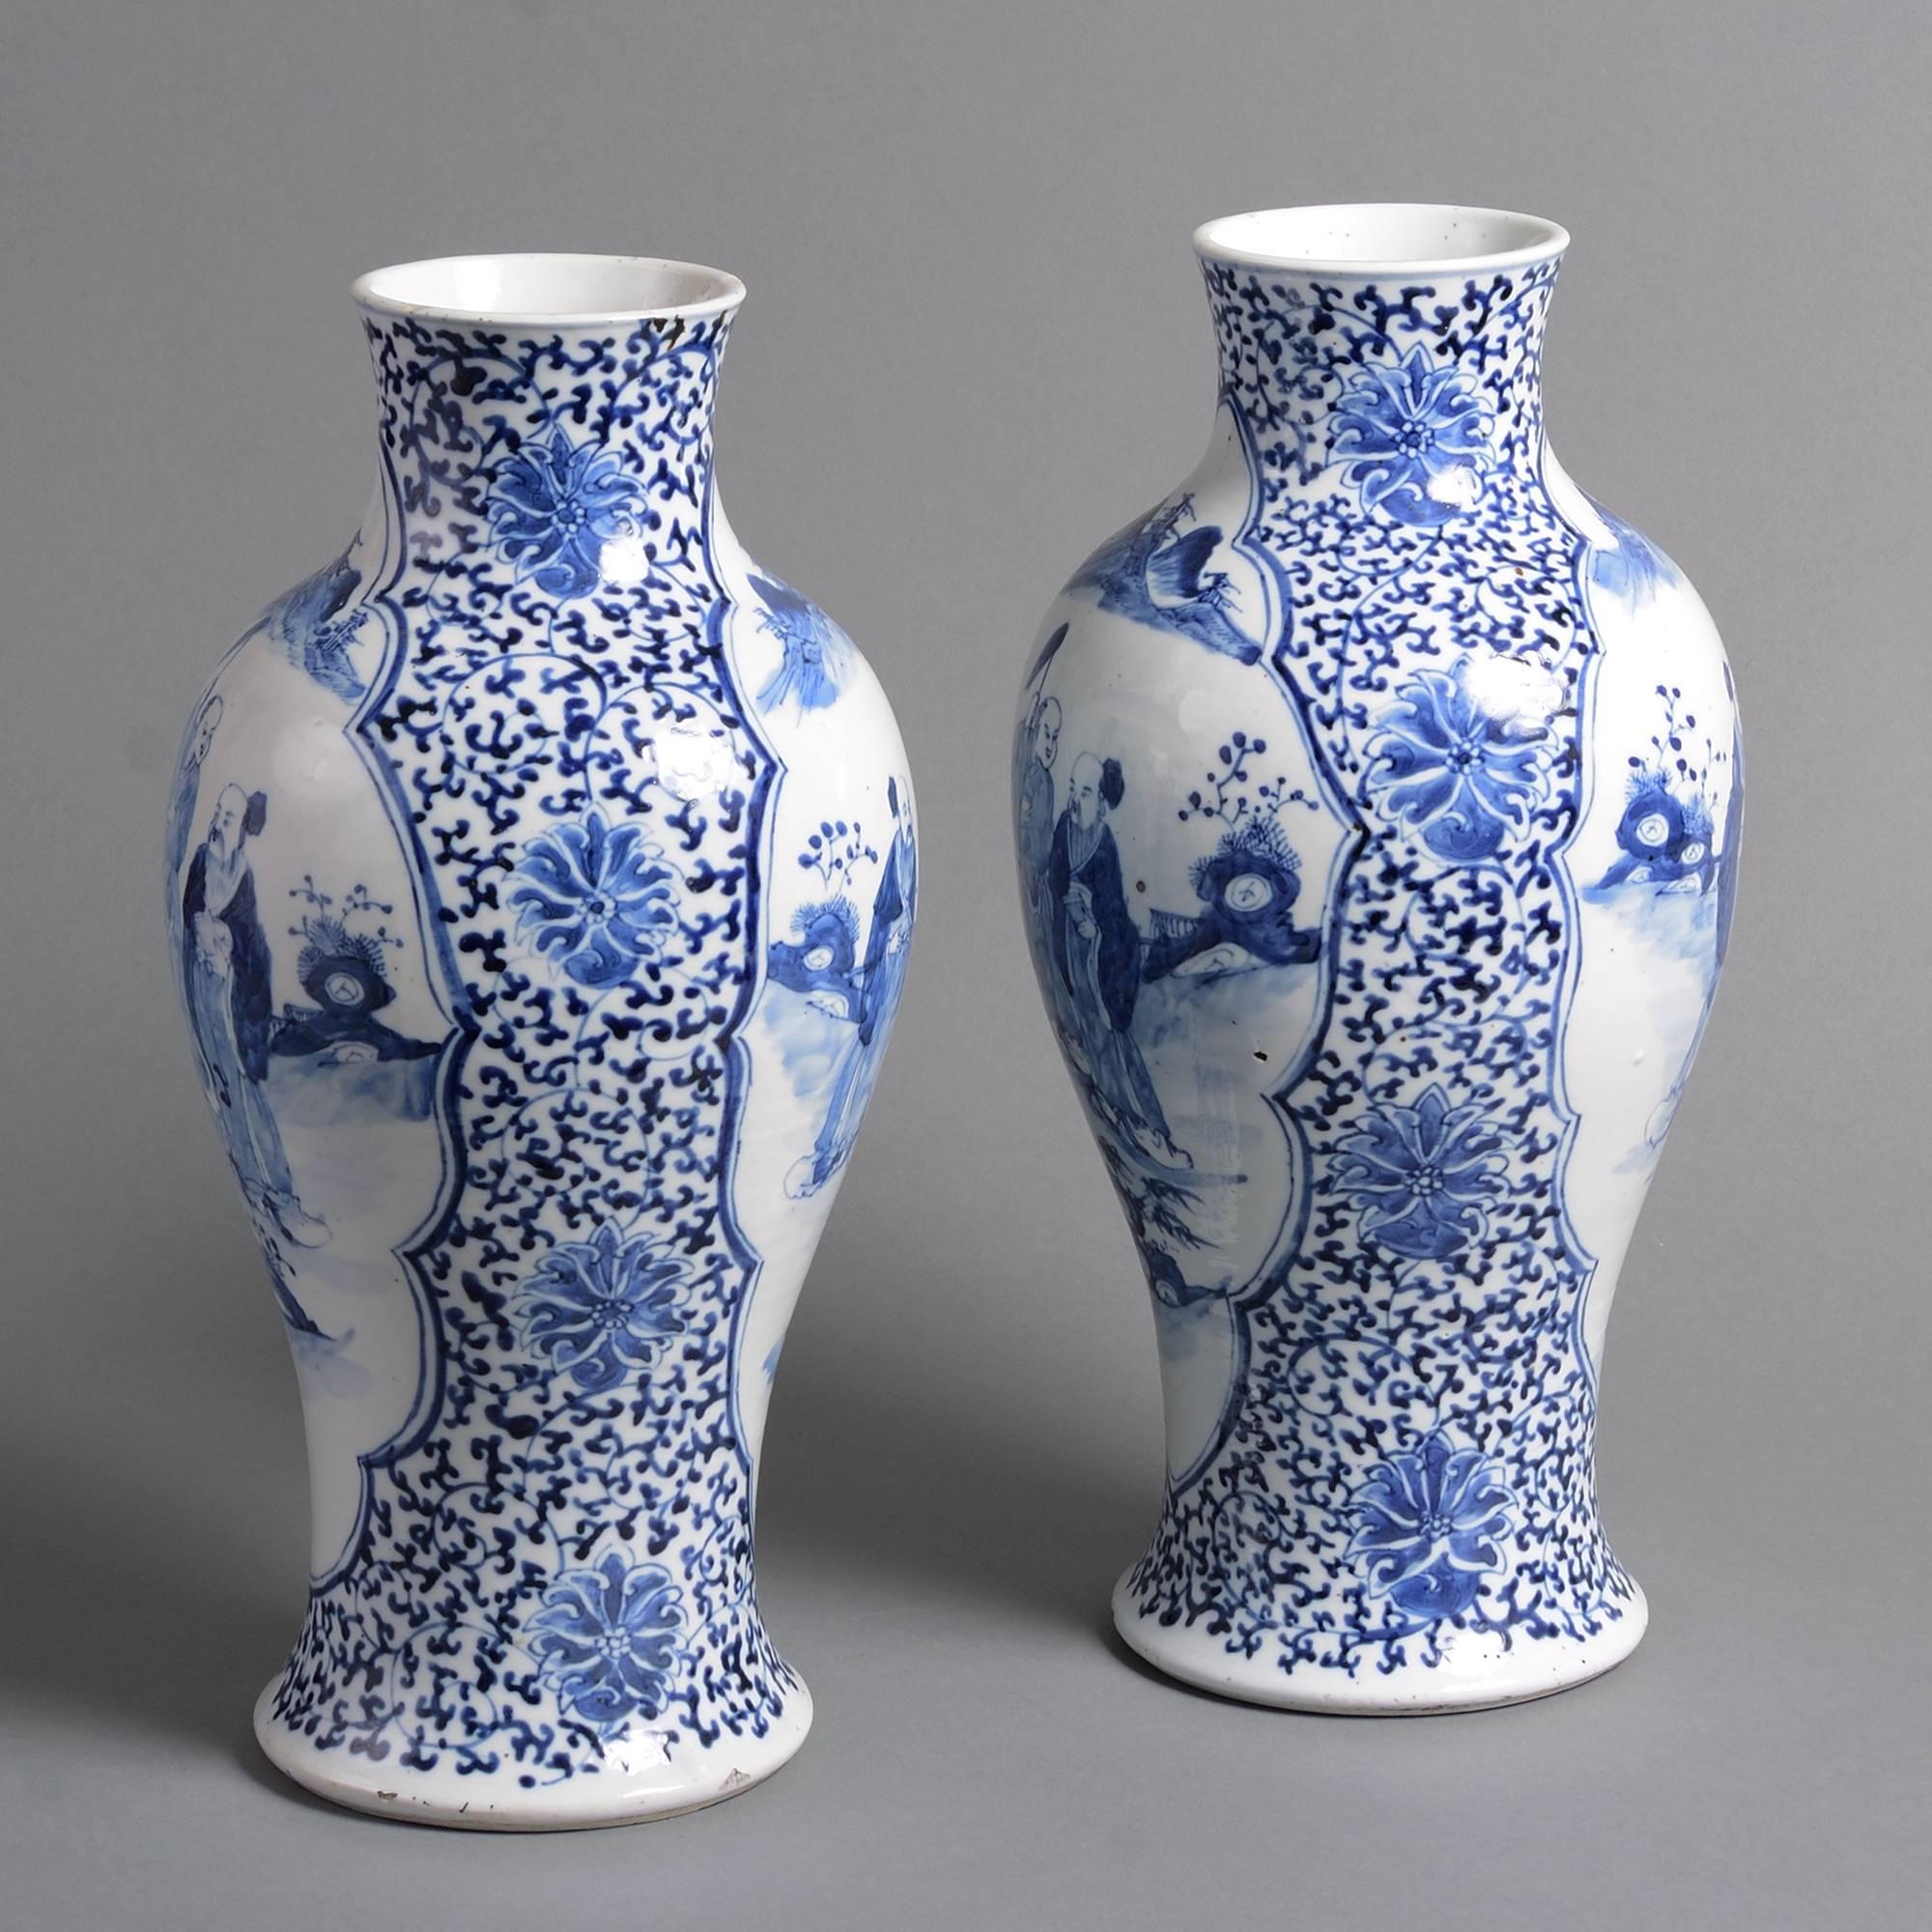 Chinese Pair of 19th Century Qing Period Blue and White Porcelain Vases